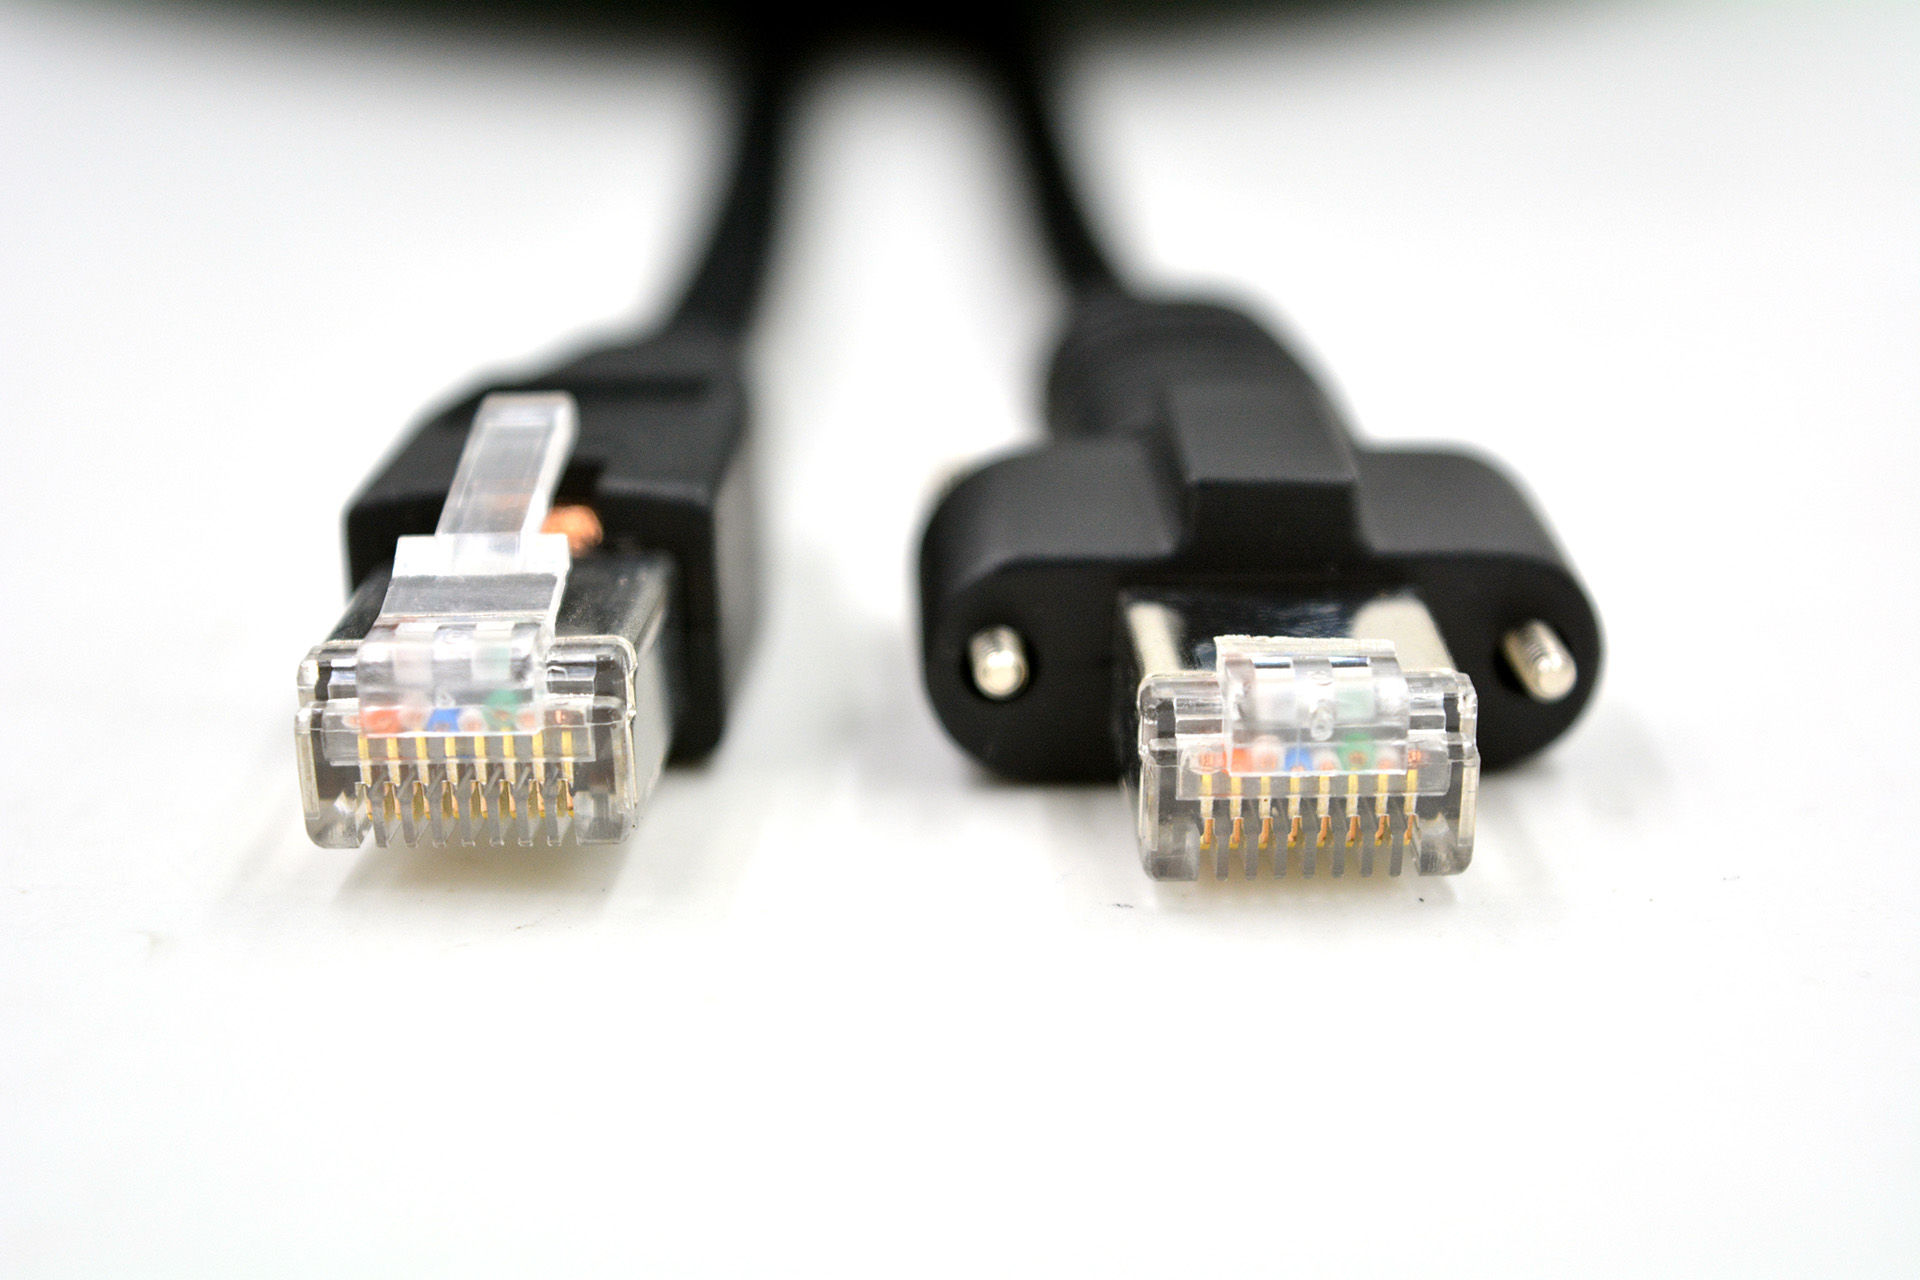 GigE Cat6 vision cable with RJ45 locking screws